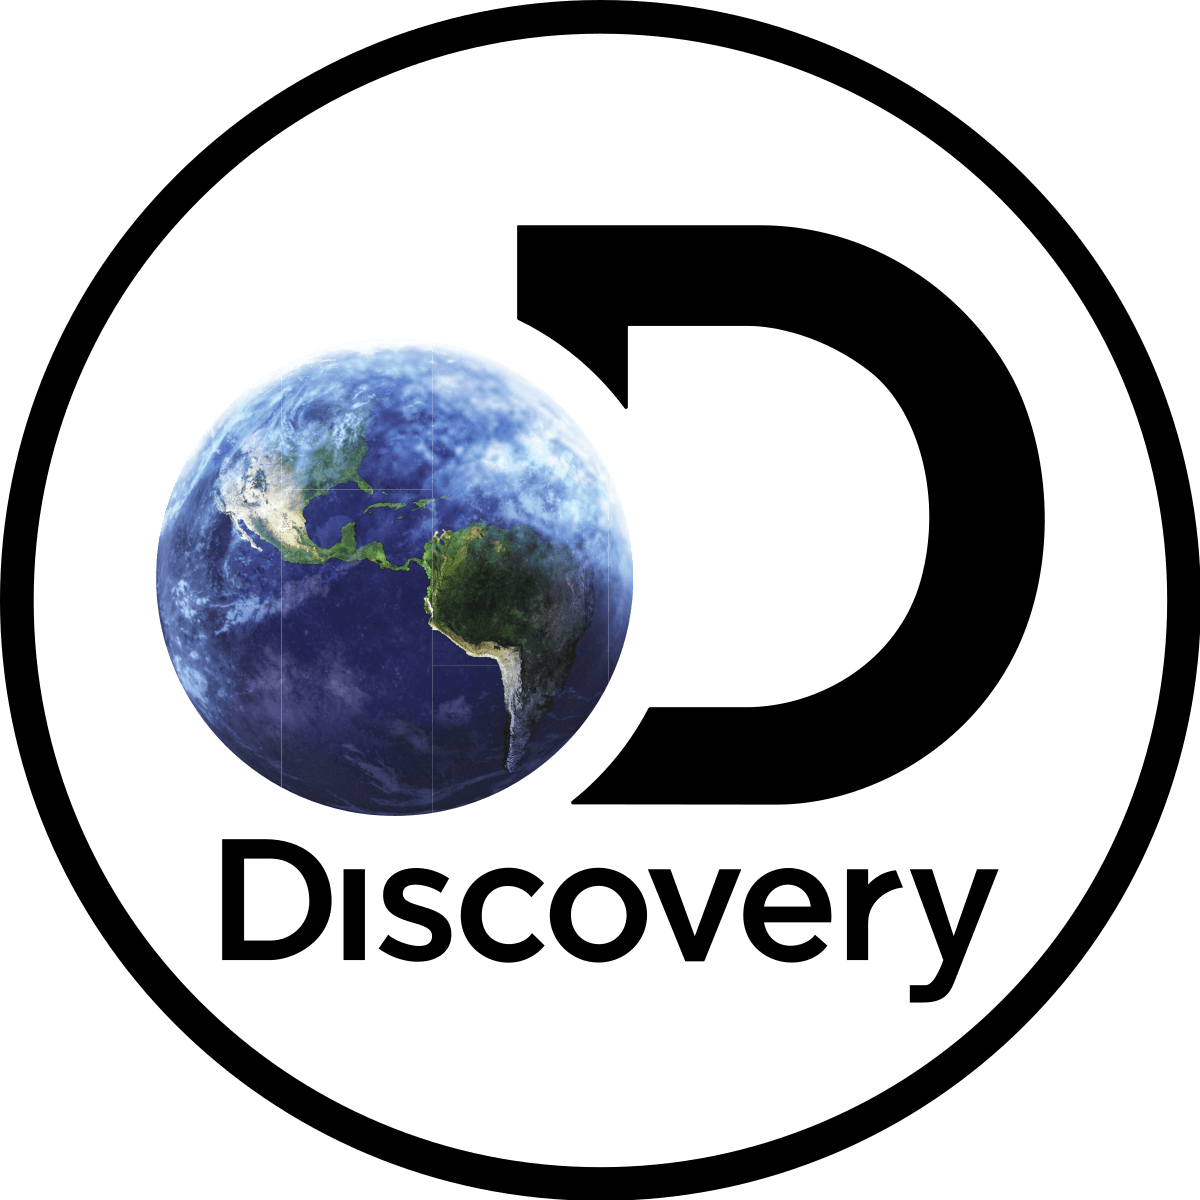 Samples of Woman in Globe Logo - Discovery Channel